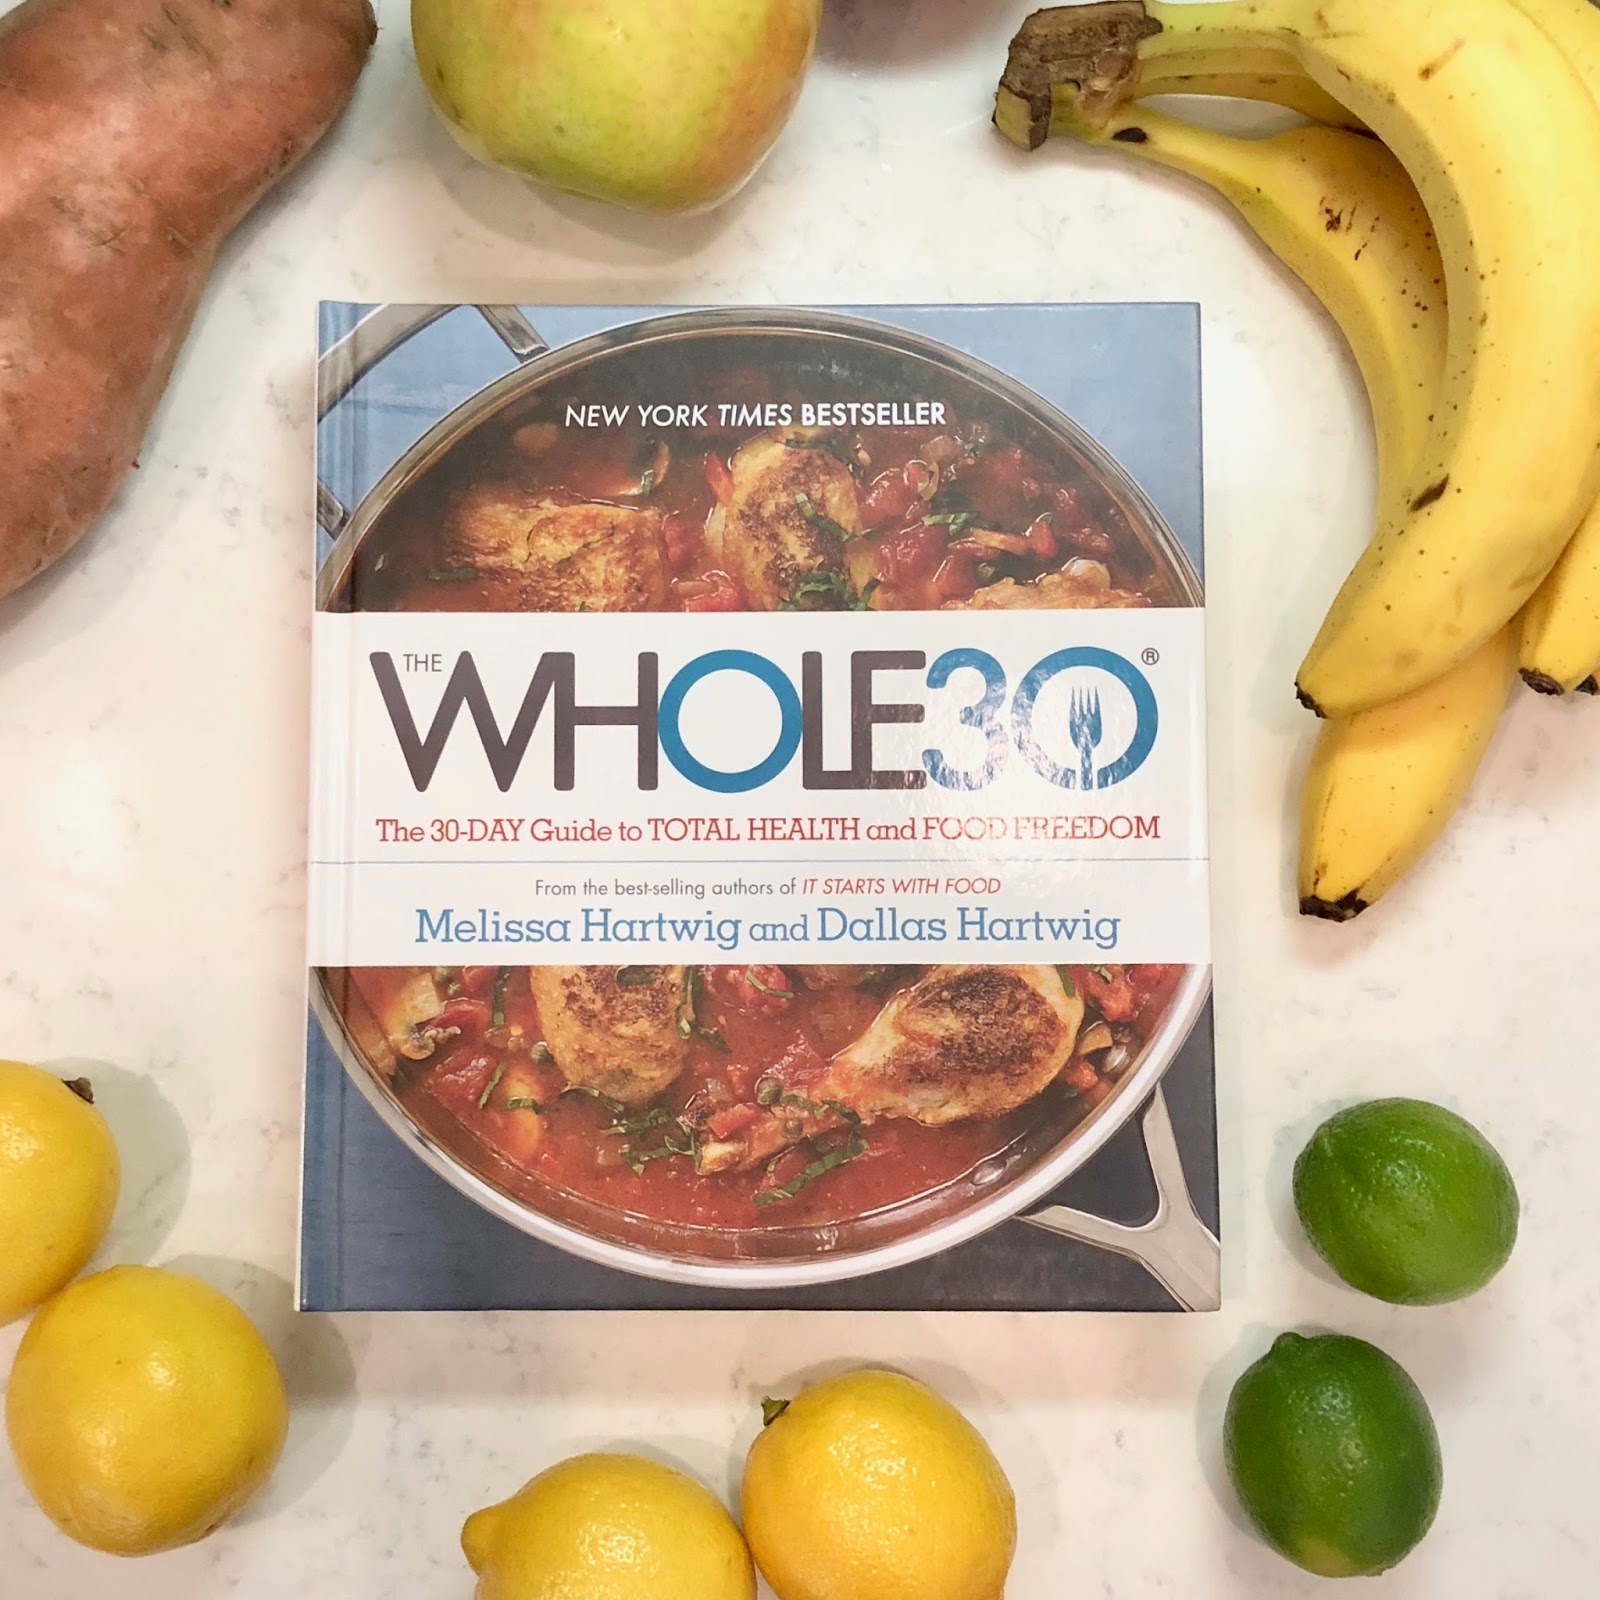 Our Whole30 Experience 